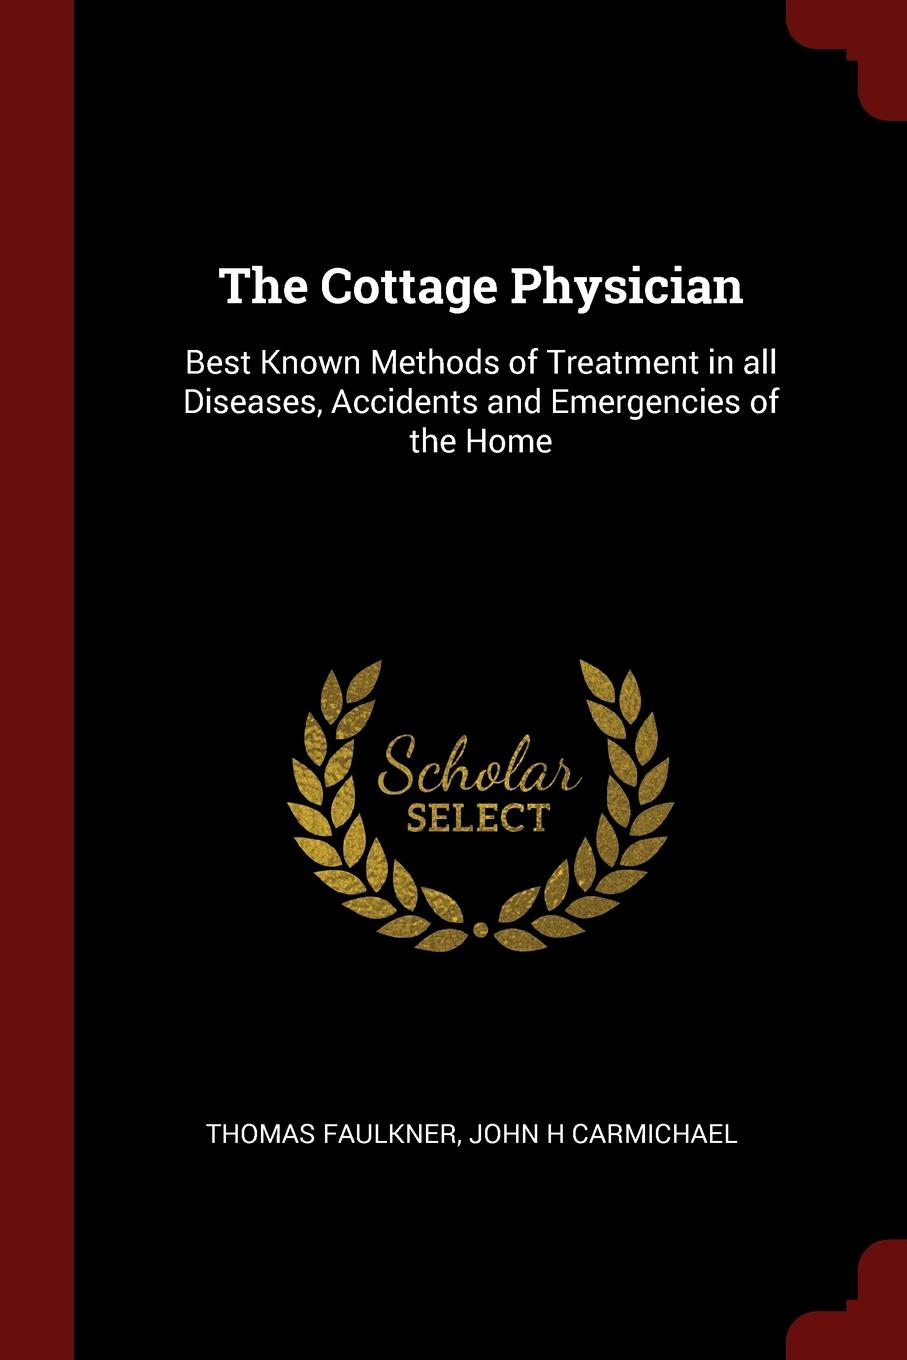 The Cottage Physician. Best Known Methods of Treatment in all Diseases, Accidents and Emergencies of the Home